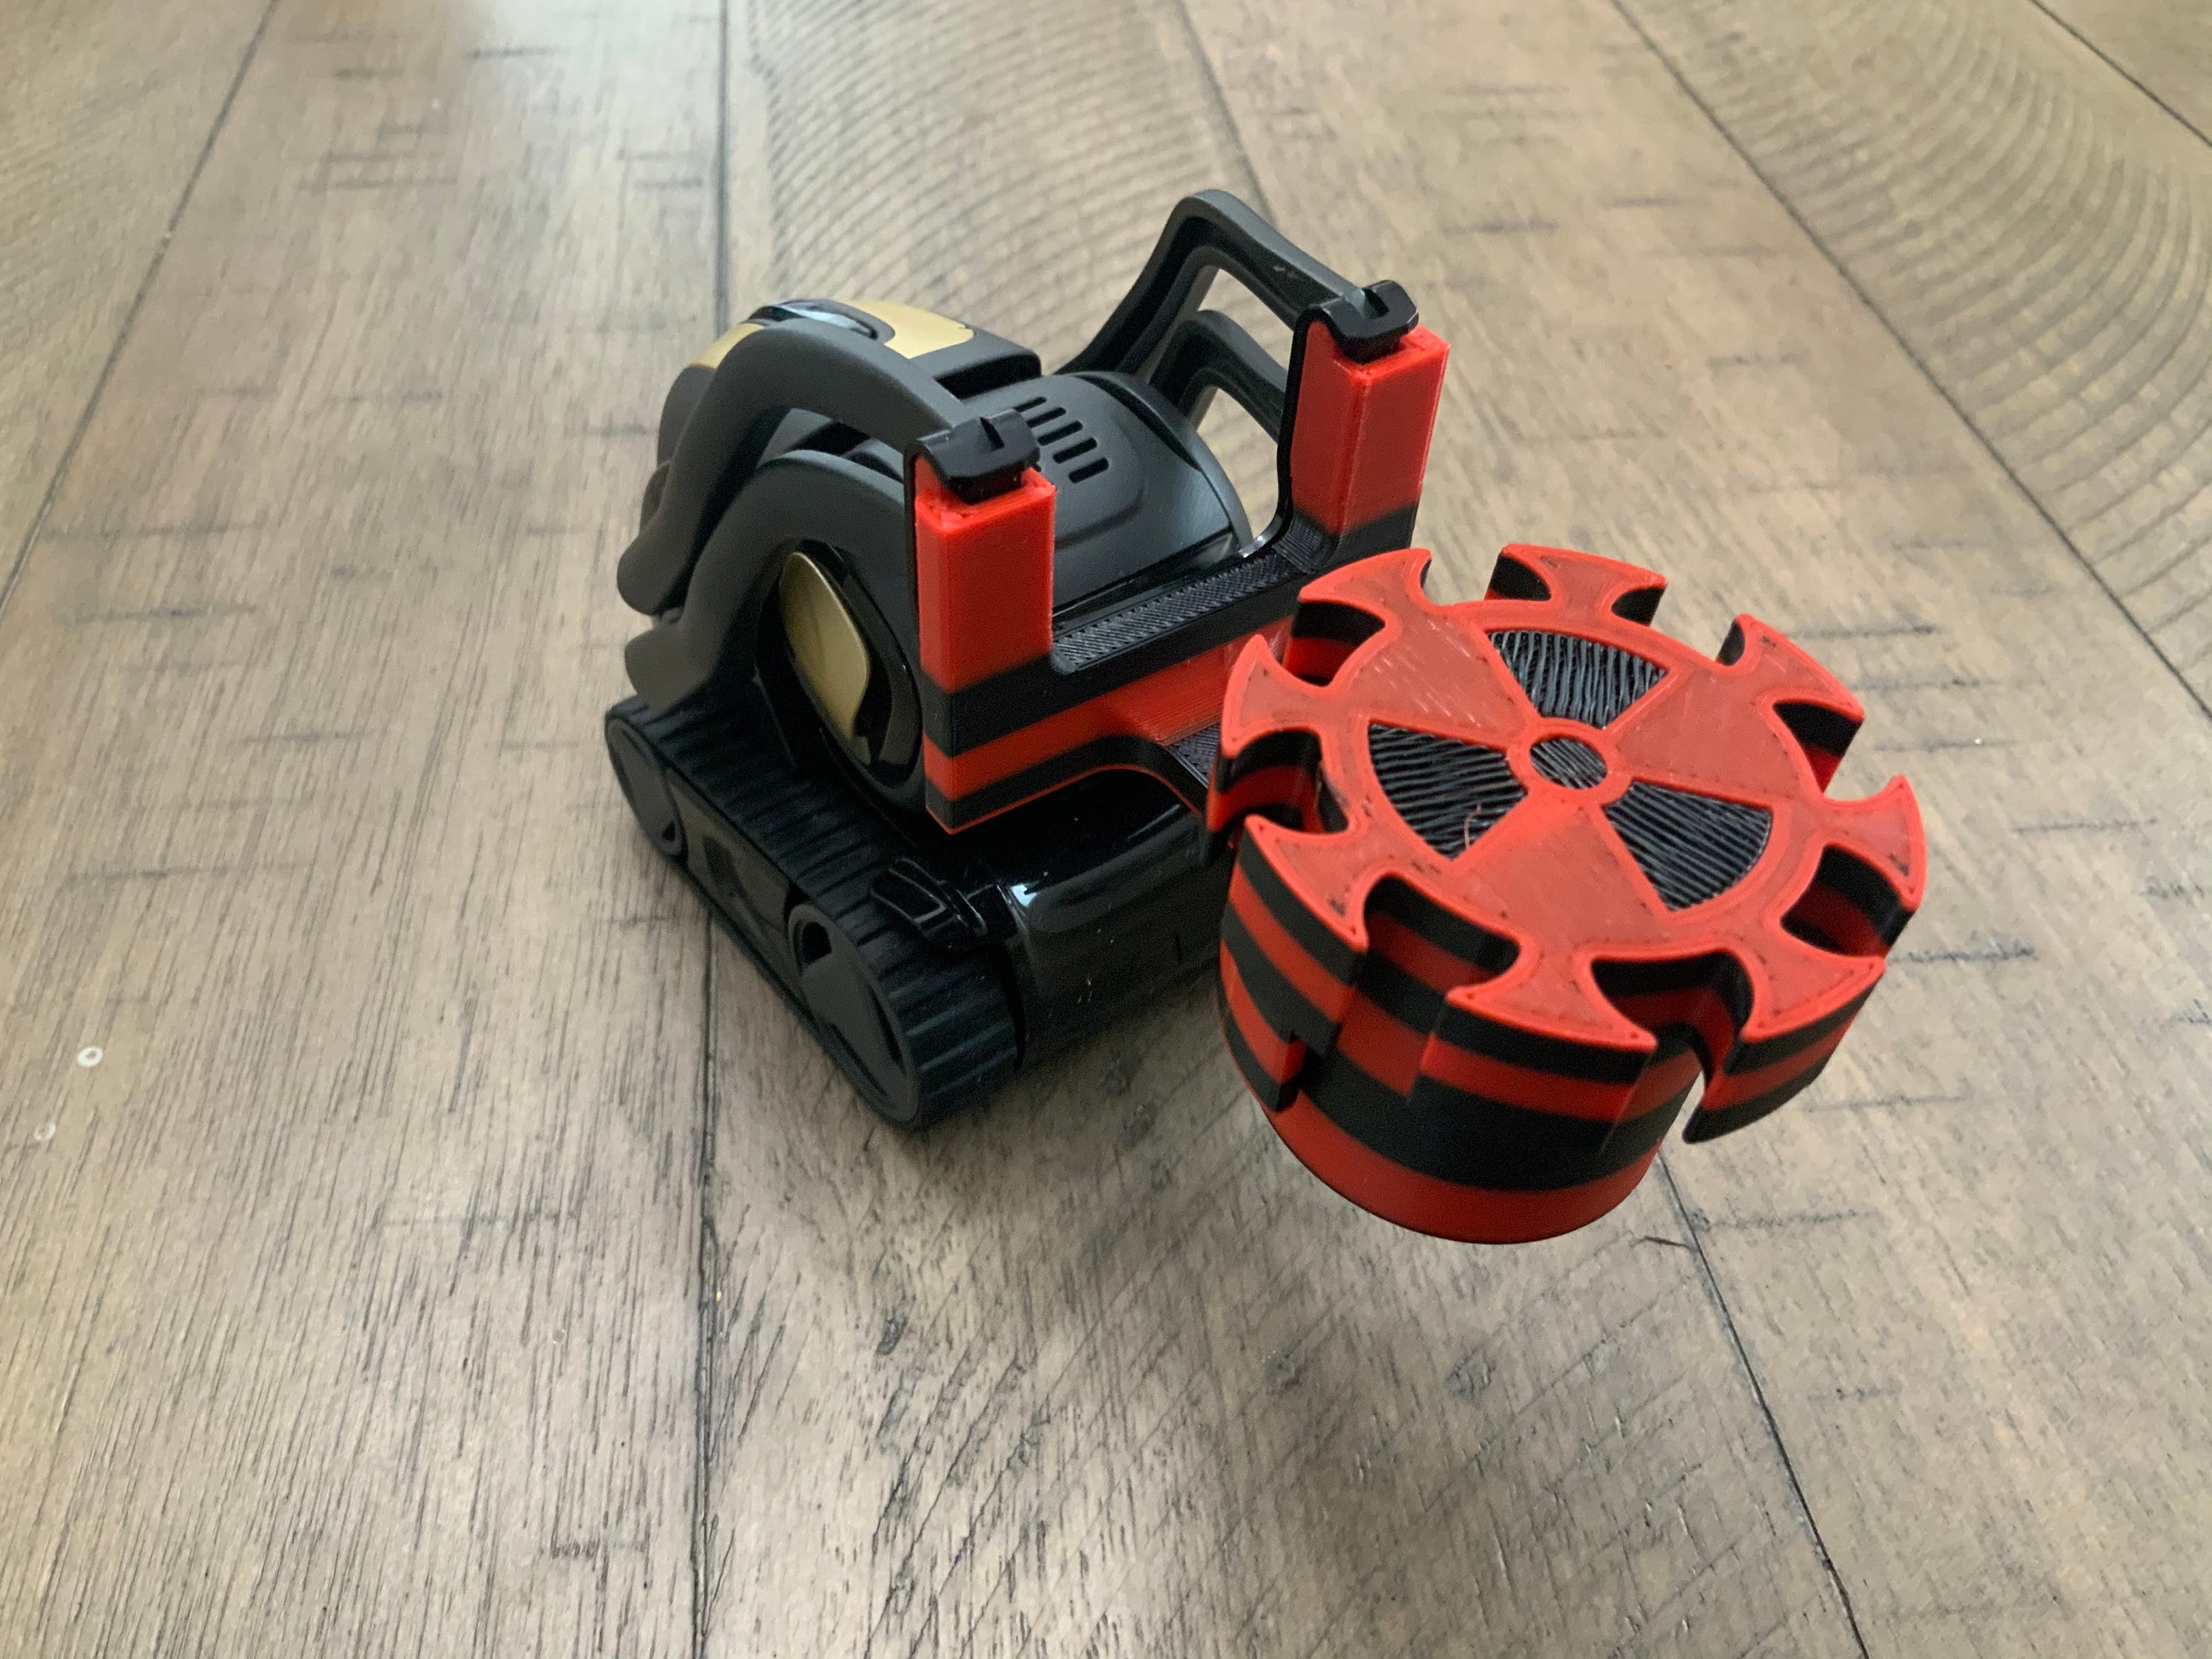 Cozmo & Vector By Anki robot, 3D printed Racing wing (Red)